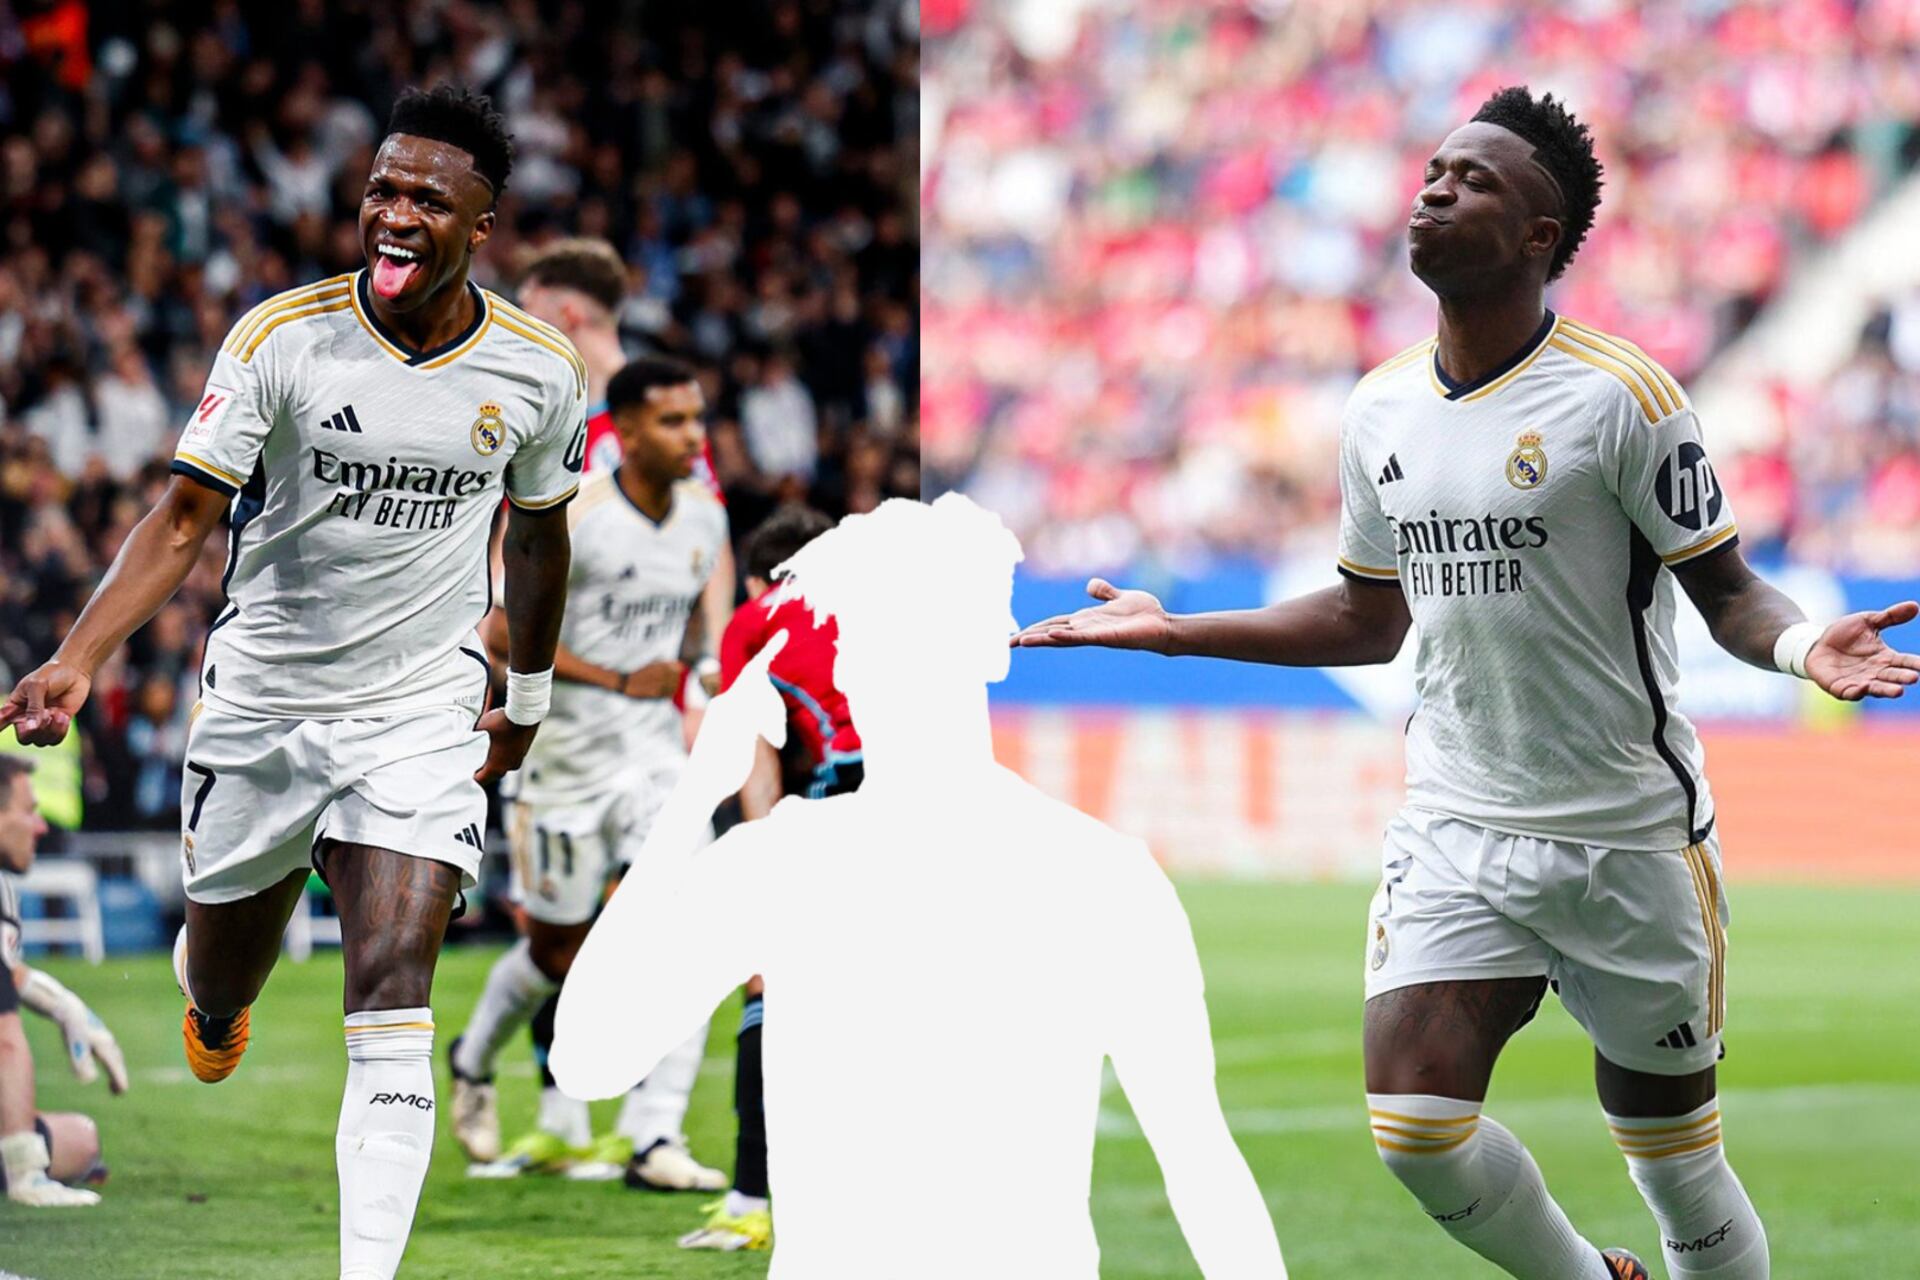 La Liga star reveals the sad reason why Vinicius Jr. is insulted by many fans